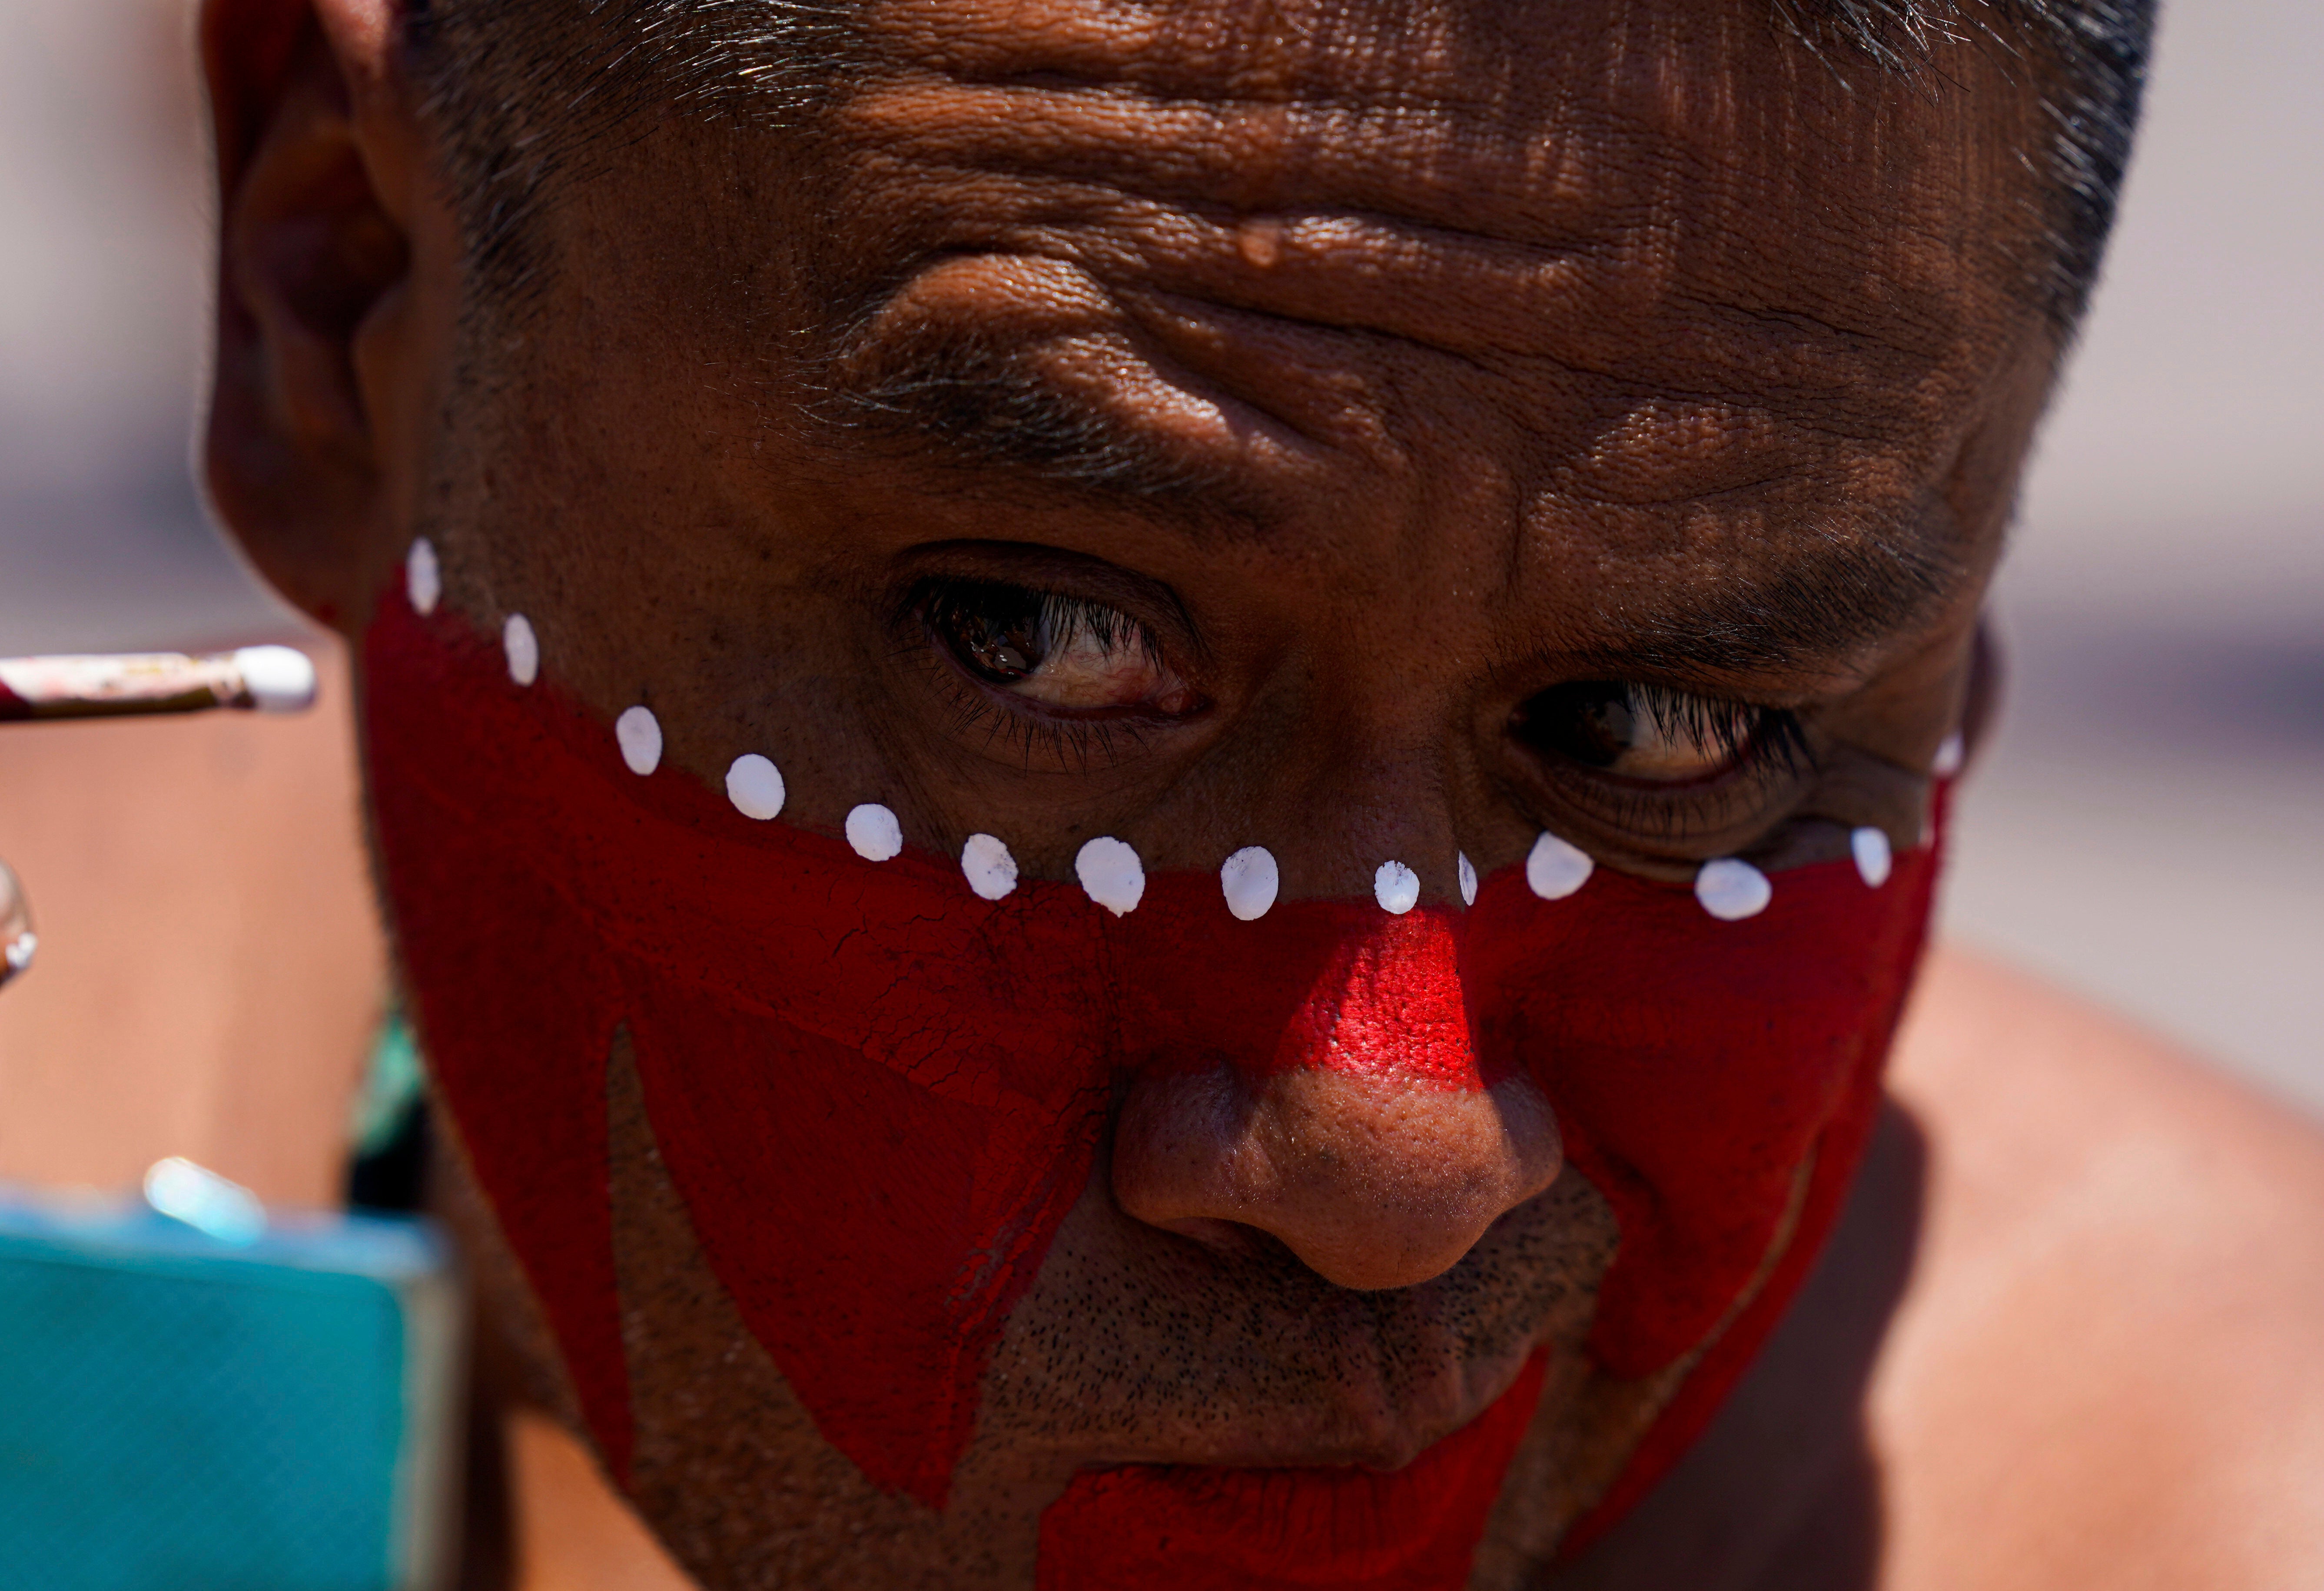 Pictures of the Week in Latin America and Caribbean Photo Gallery